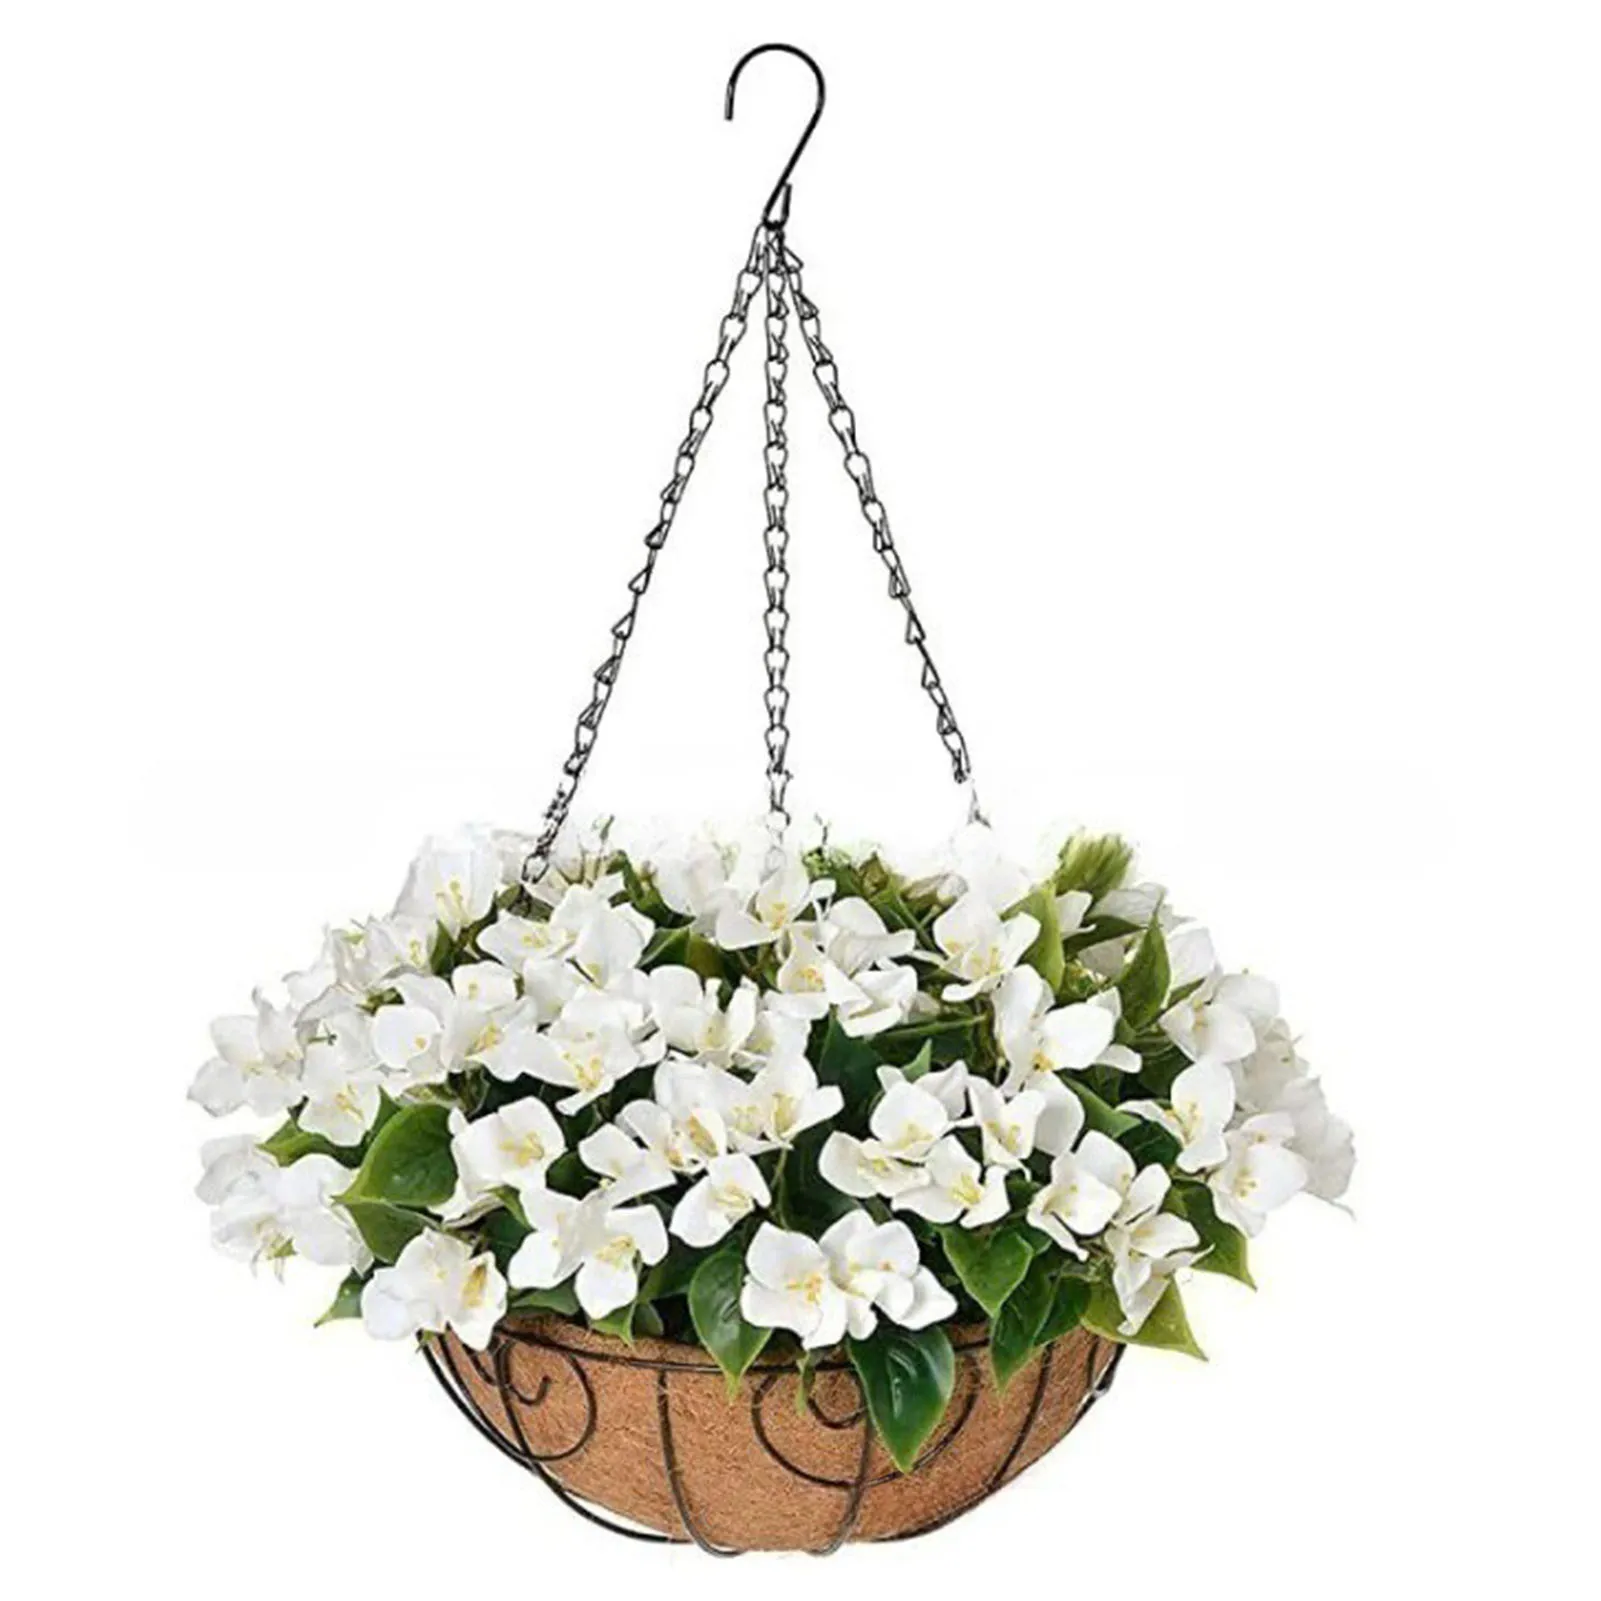 

Garden Romantic Office Indoor Outdoor Wedding Artificial Hanging Basket With Flowers Party DIY Craft Porch Yard Guesthouses